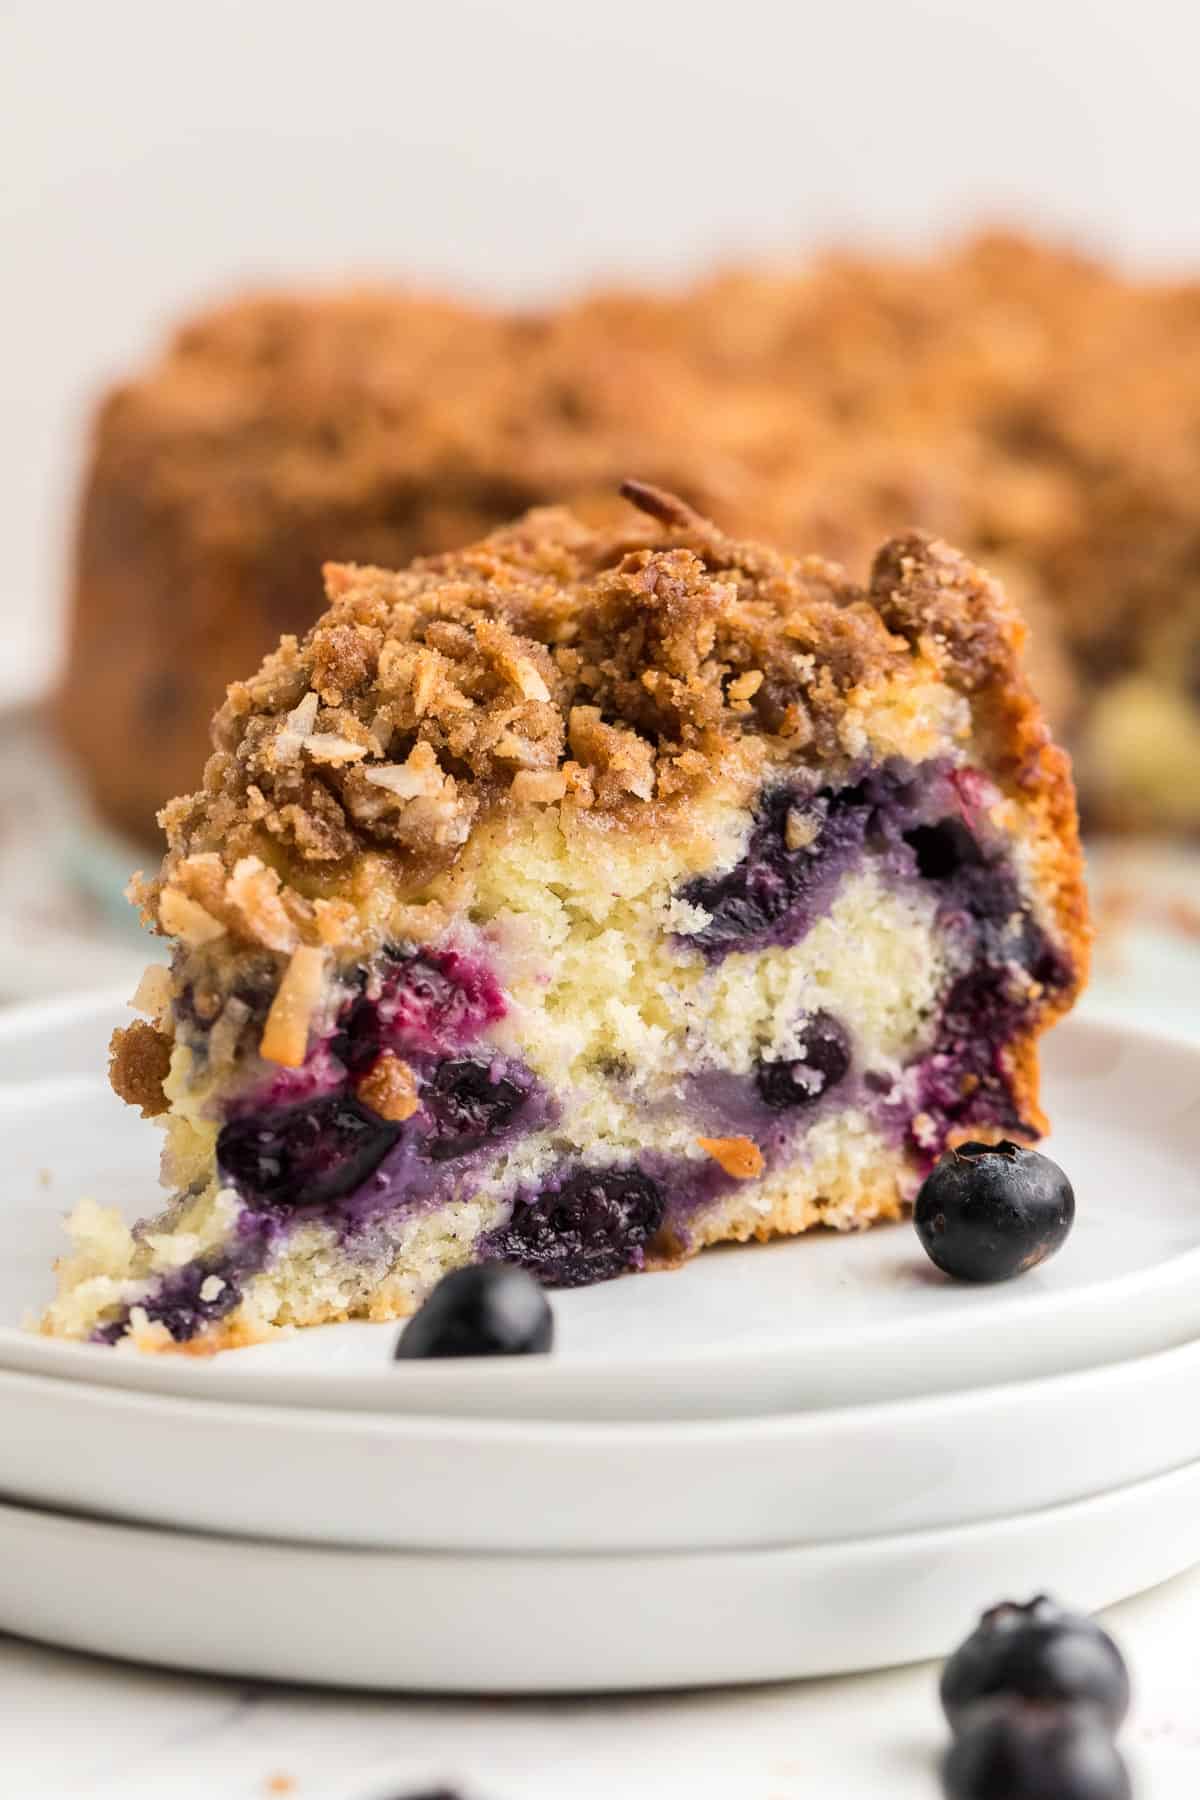 A slice of Blueberry Coffee Cake on a white plate.